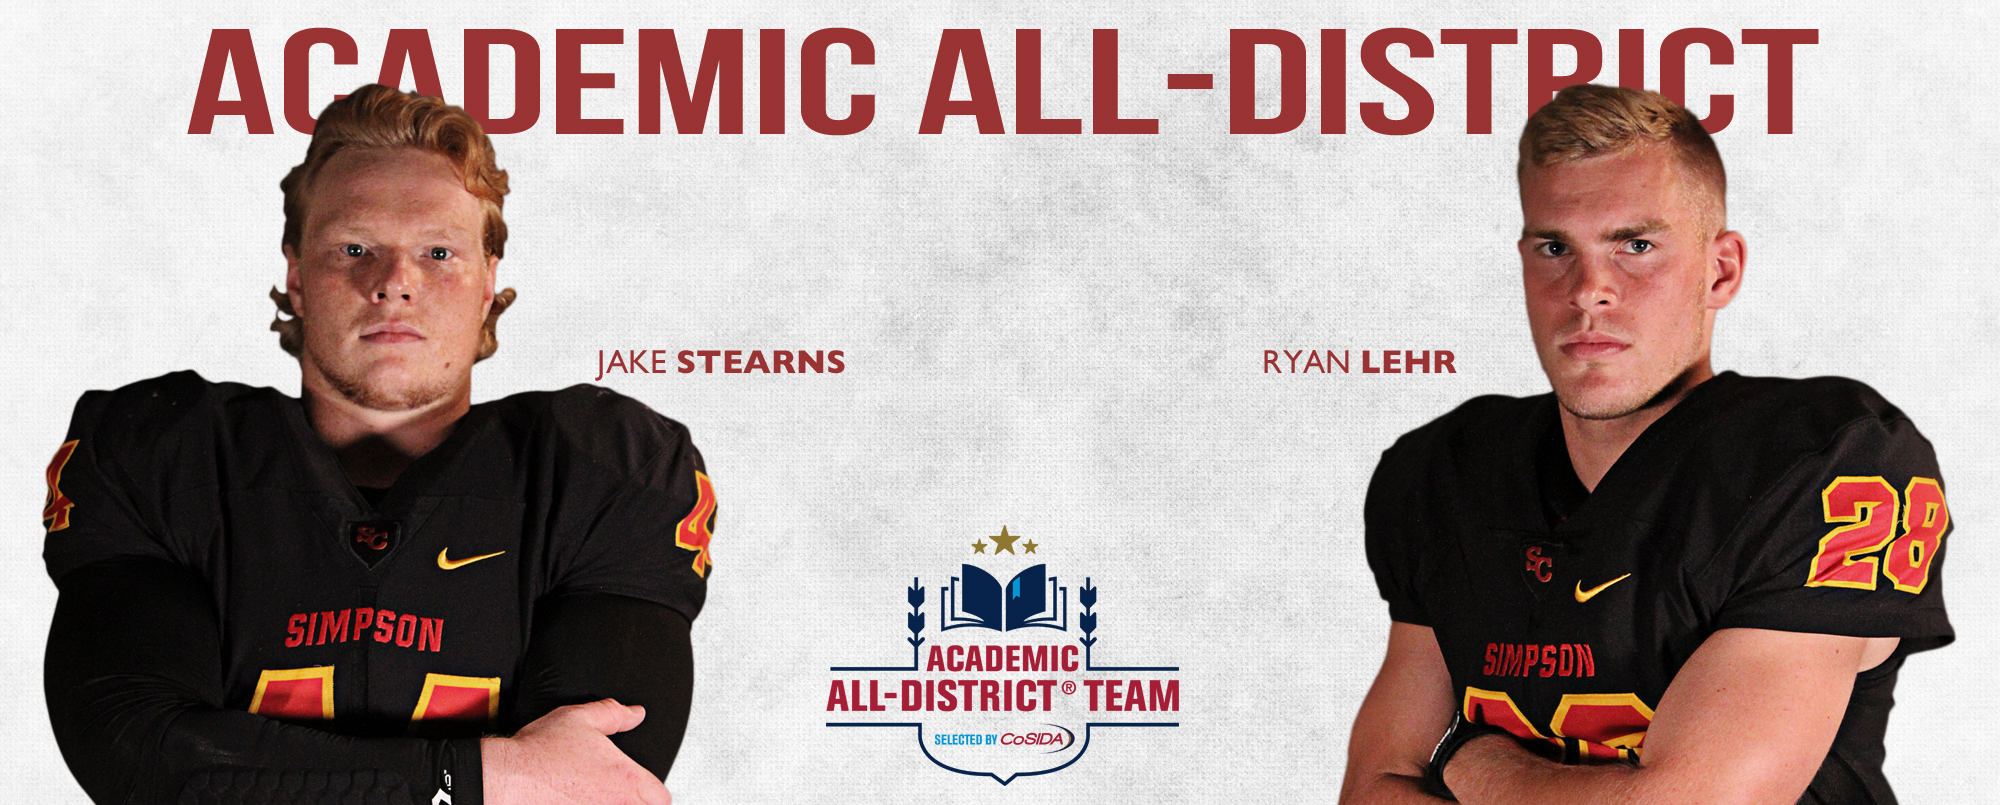 Jake Stearns and Ryan Lehr earned a spot on the 2017 CoSIDA Academic All-District 8 First Team.